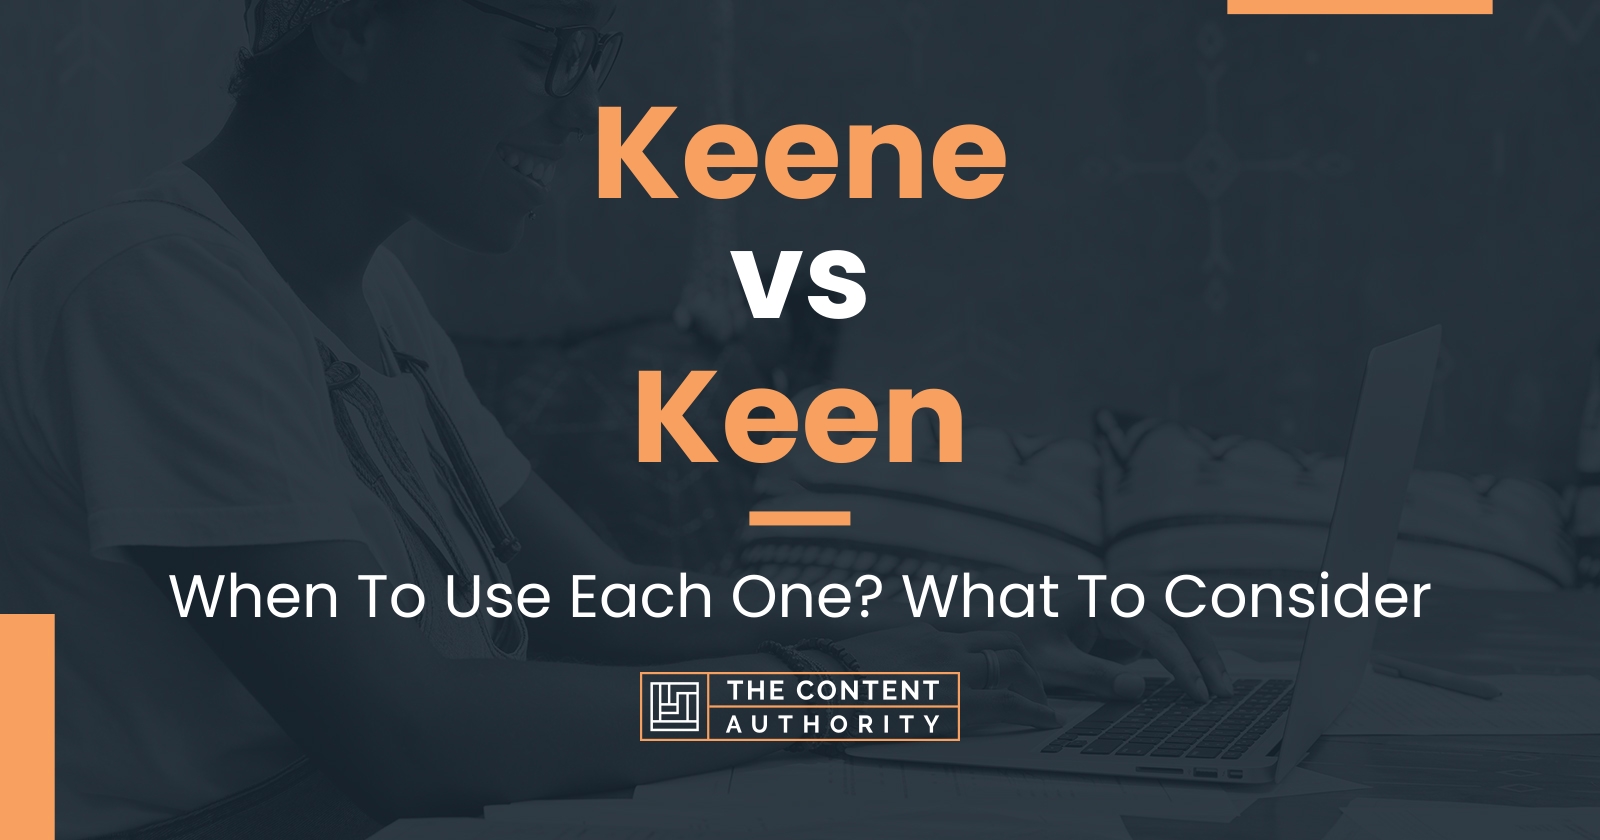 Keene vs Keen: When To Use Each One? What To Consider